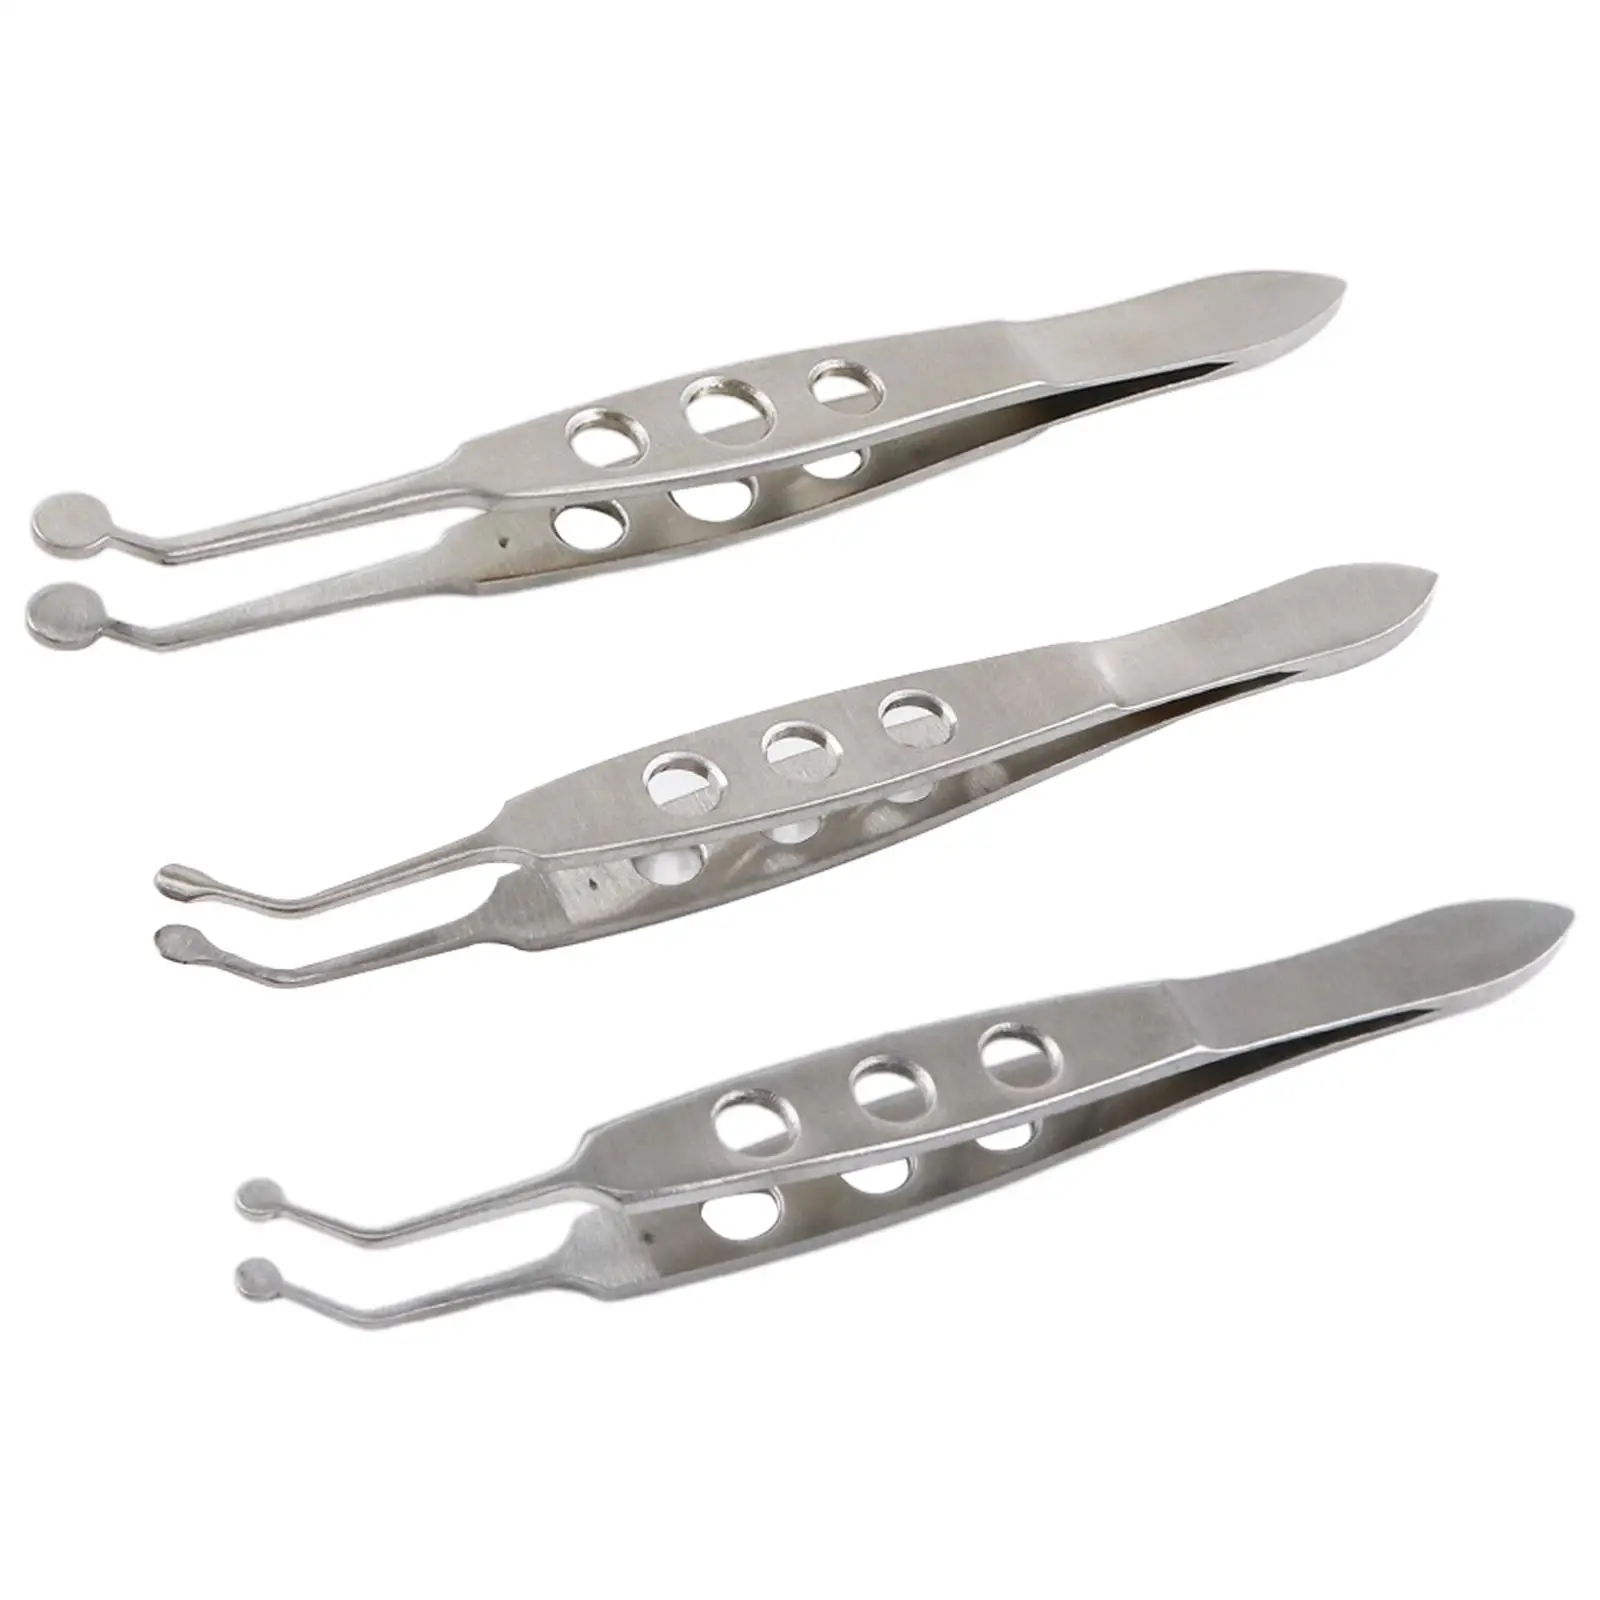 Meibomian Gland Expressor Forceps Ophthalmological Stainless Steel Clamp Tools for Palpebral Gland Massage Meibomian Flap Eyelid